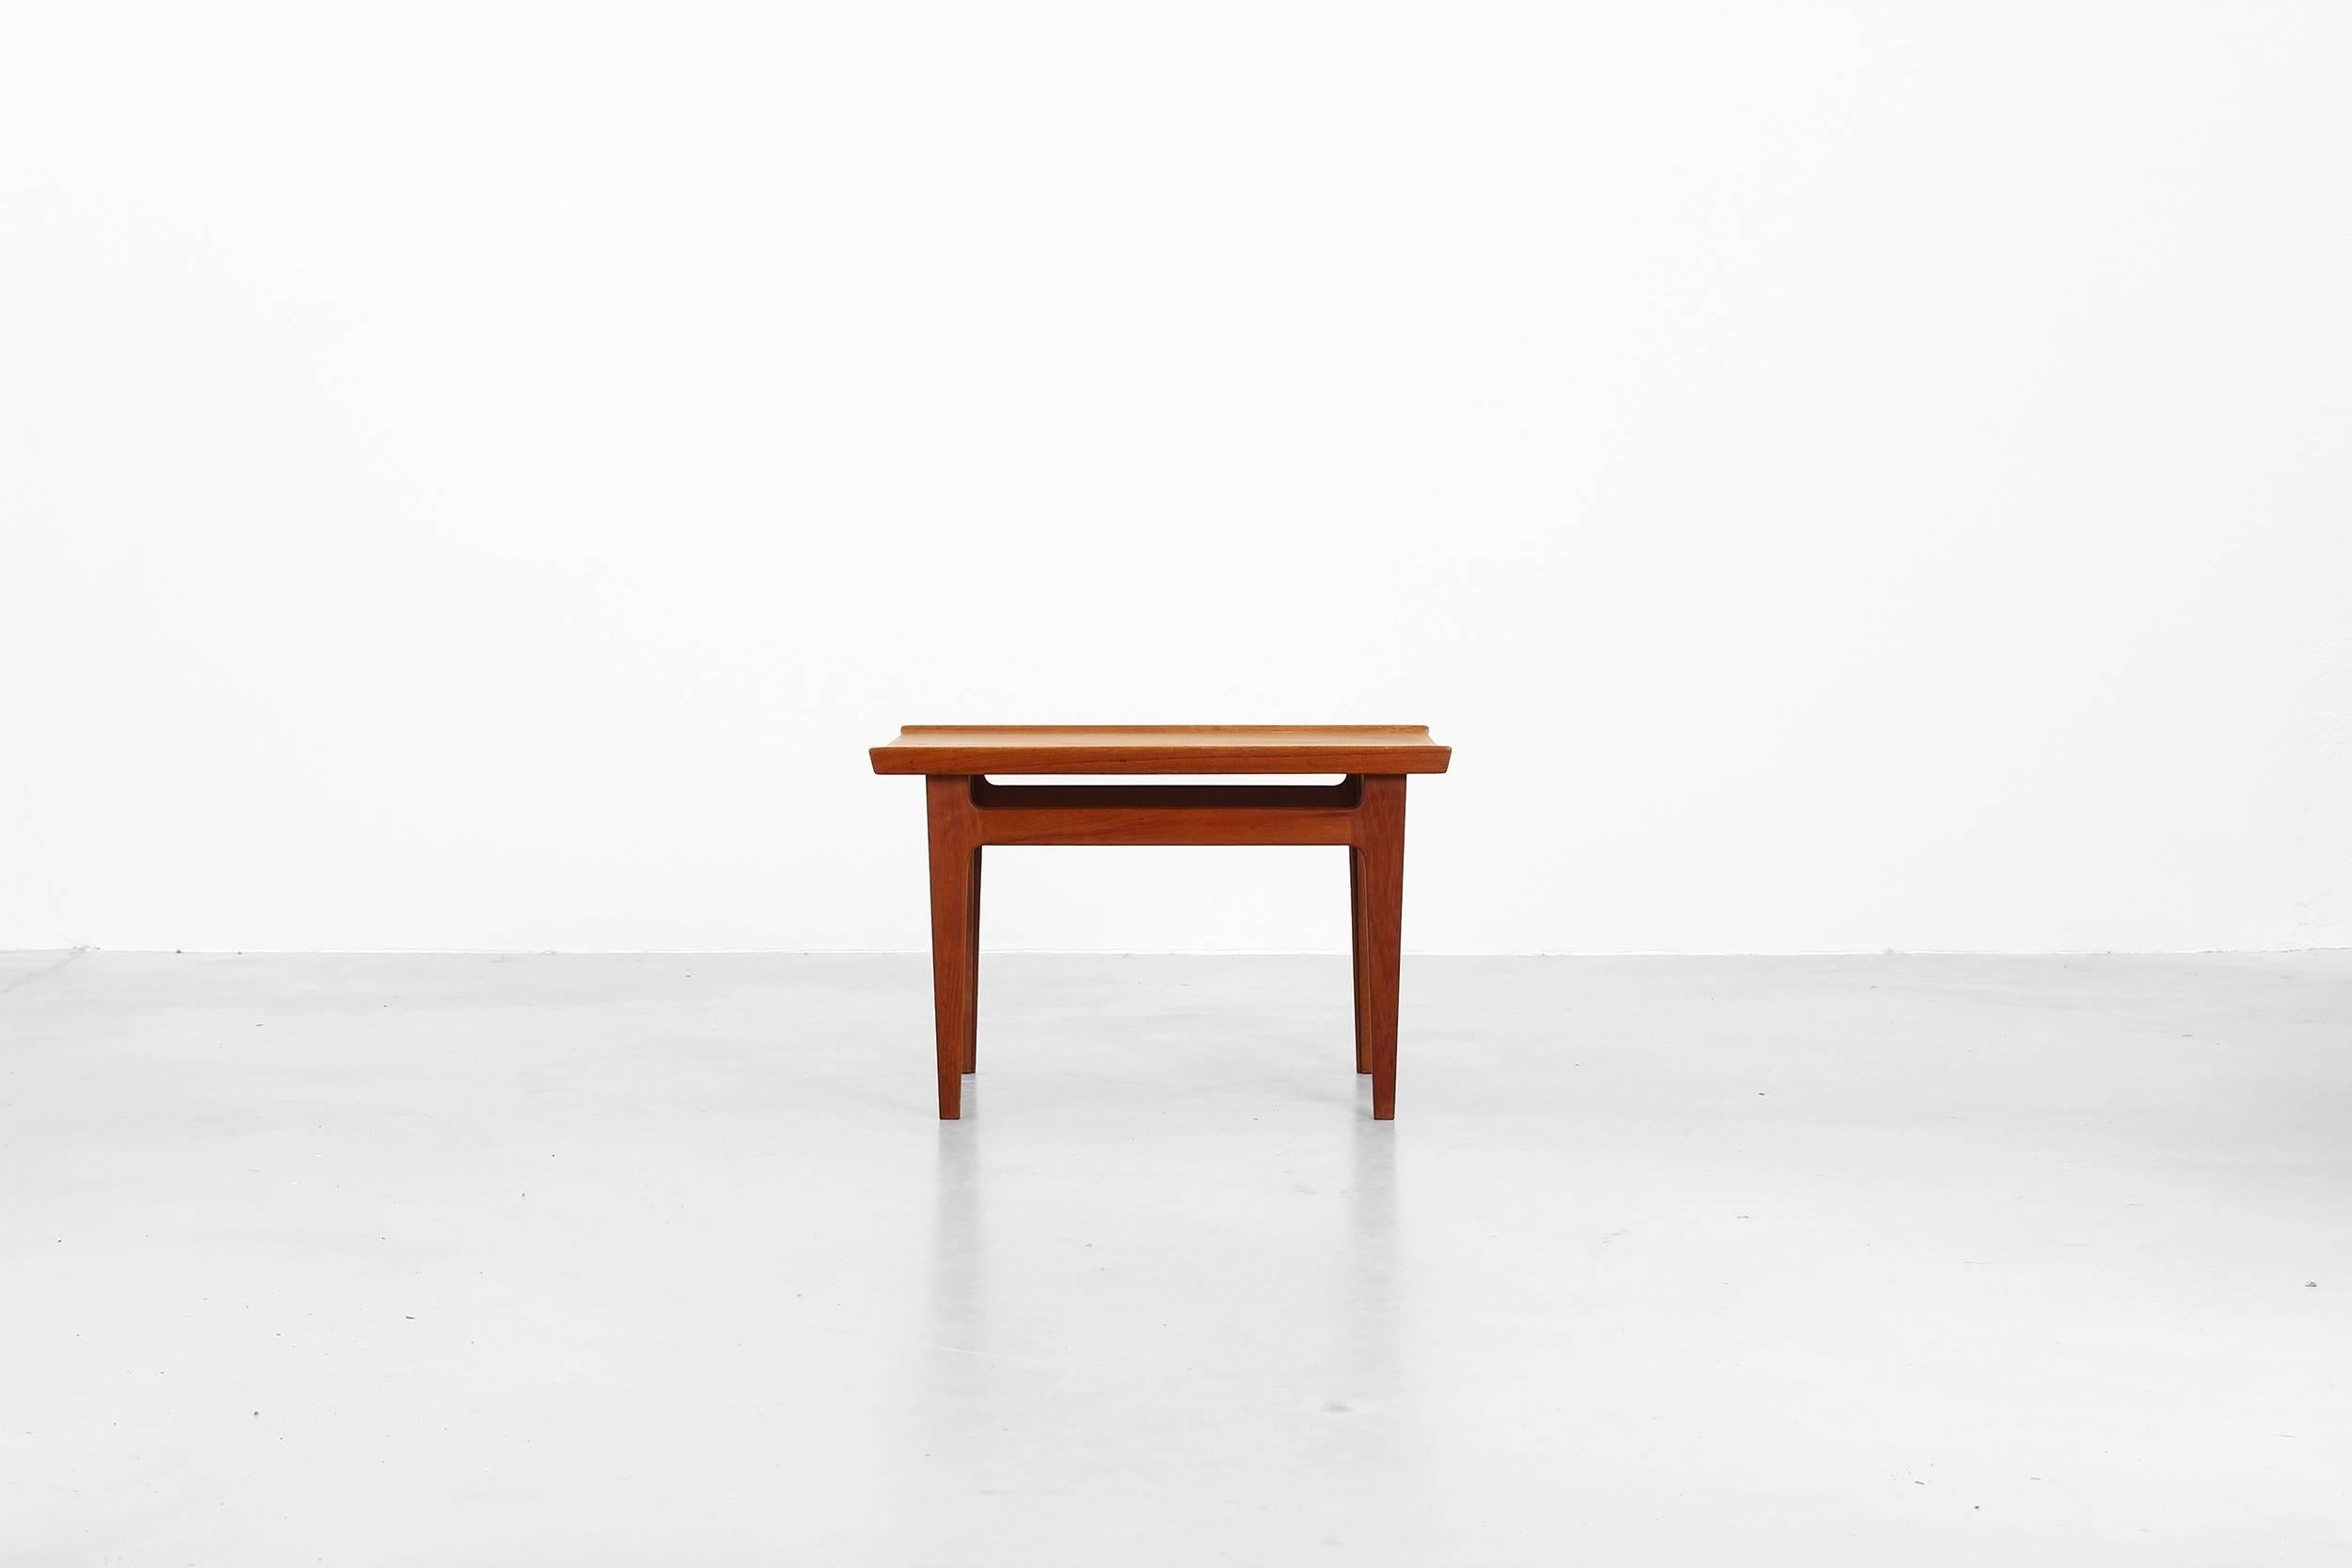 Beautiful coffee table by designed by Finn Juhl for France & Daverkosen, in the 1950s made in Denmark. This coffee table is made of teakwood and is in a very good condition with just little signs of use.